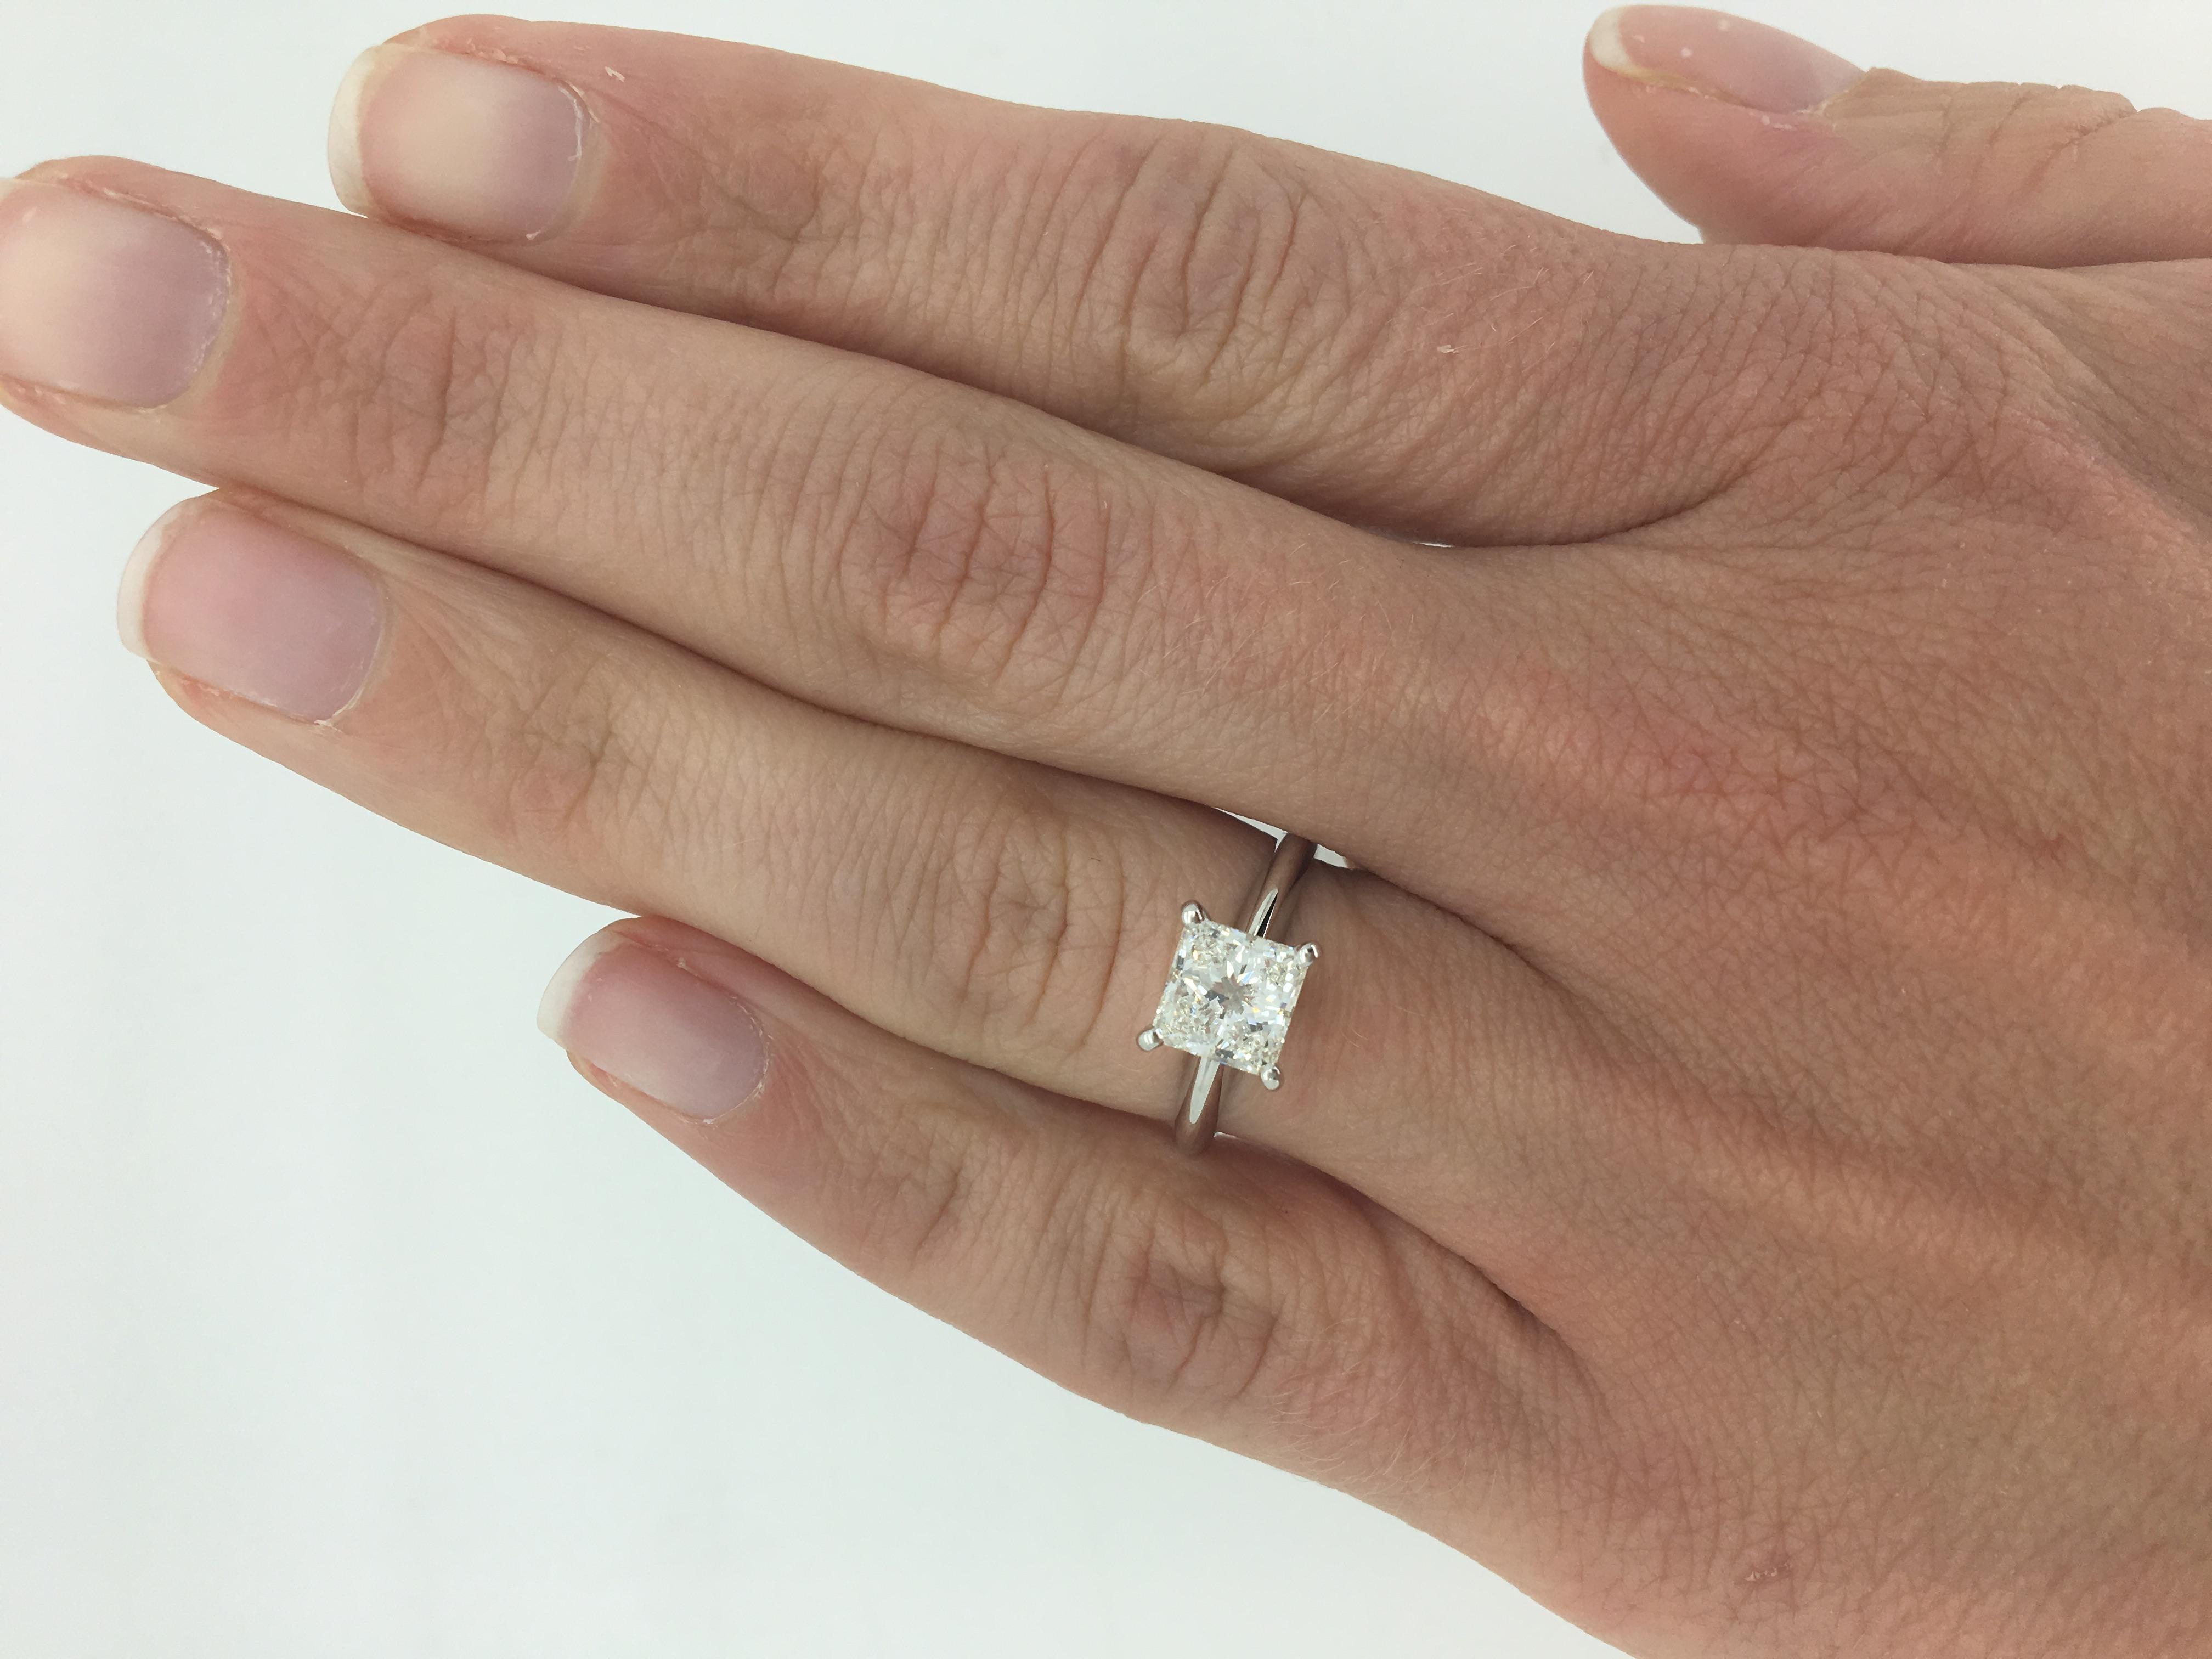 This stunning solitaire engagement ring features an approximately 1.25CT Princess Cut Diamond.

Diamond Carat Weight: Approximately 1.25CT
Diamond Cut: Princess Cut
Diamond Color: I-J 
Diamond Clarity:  SI1
Metal: Platinum
Ring Size: